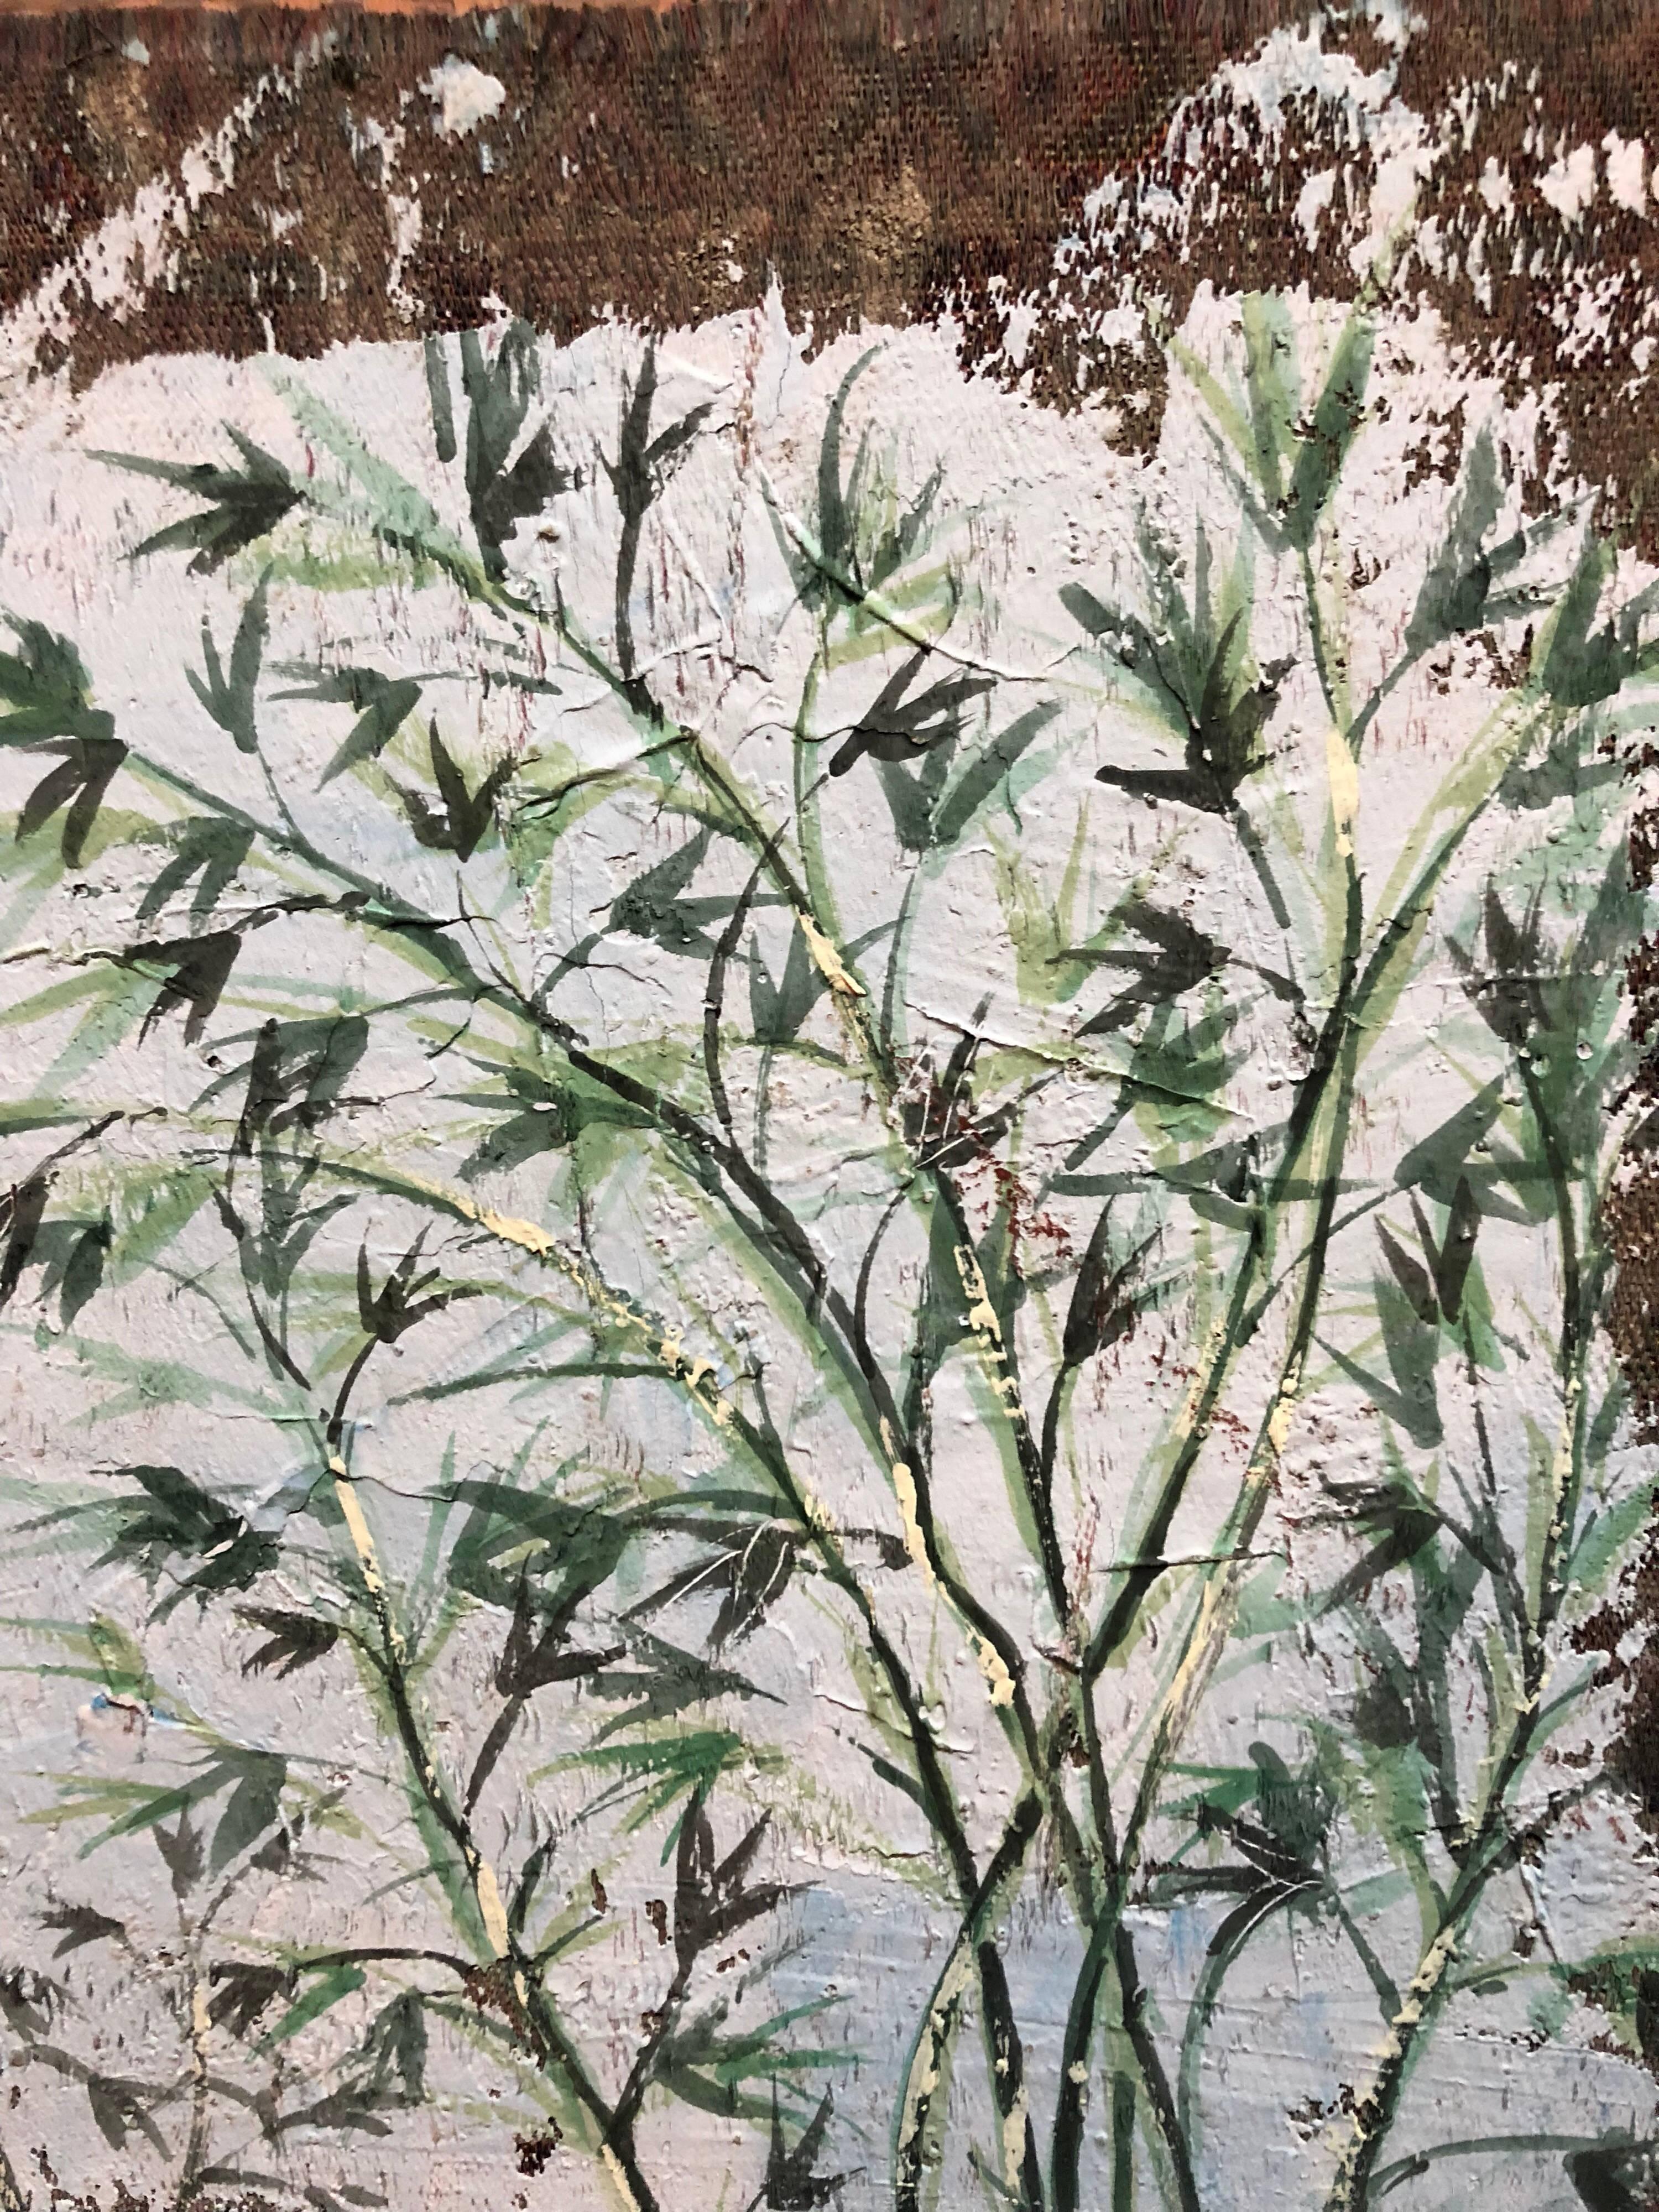 The piece uses a combination of plaster, textured board, woven patterned cloth and gouache paint to depict green bamboo plants growing against a variegated brown and pale blue background. 

Born in Paris in 1946 and raised in the heart of an idyllic